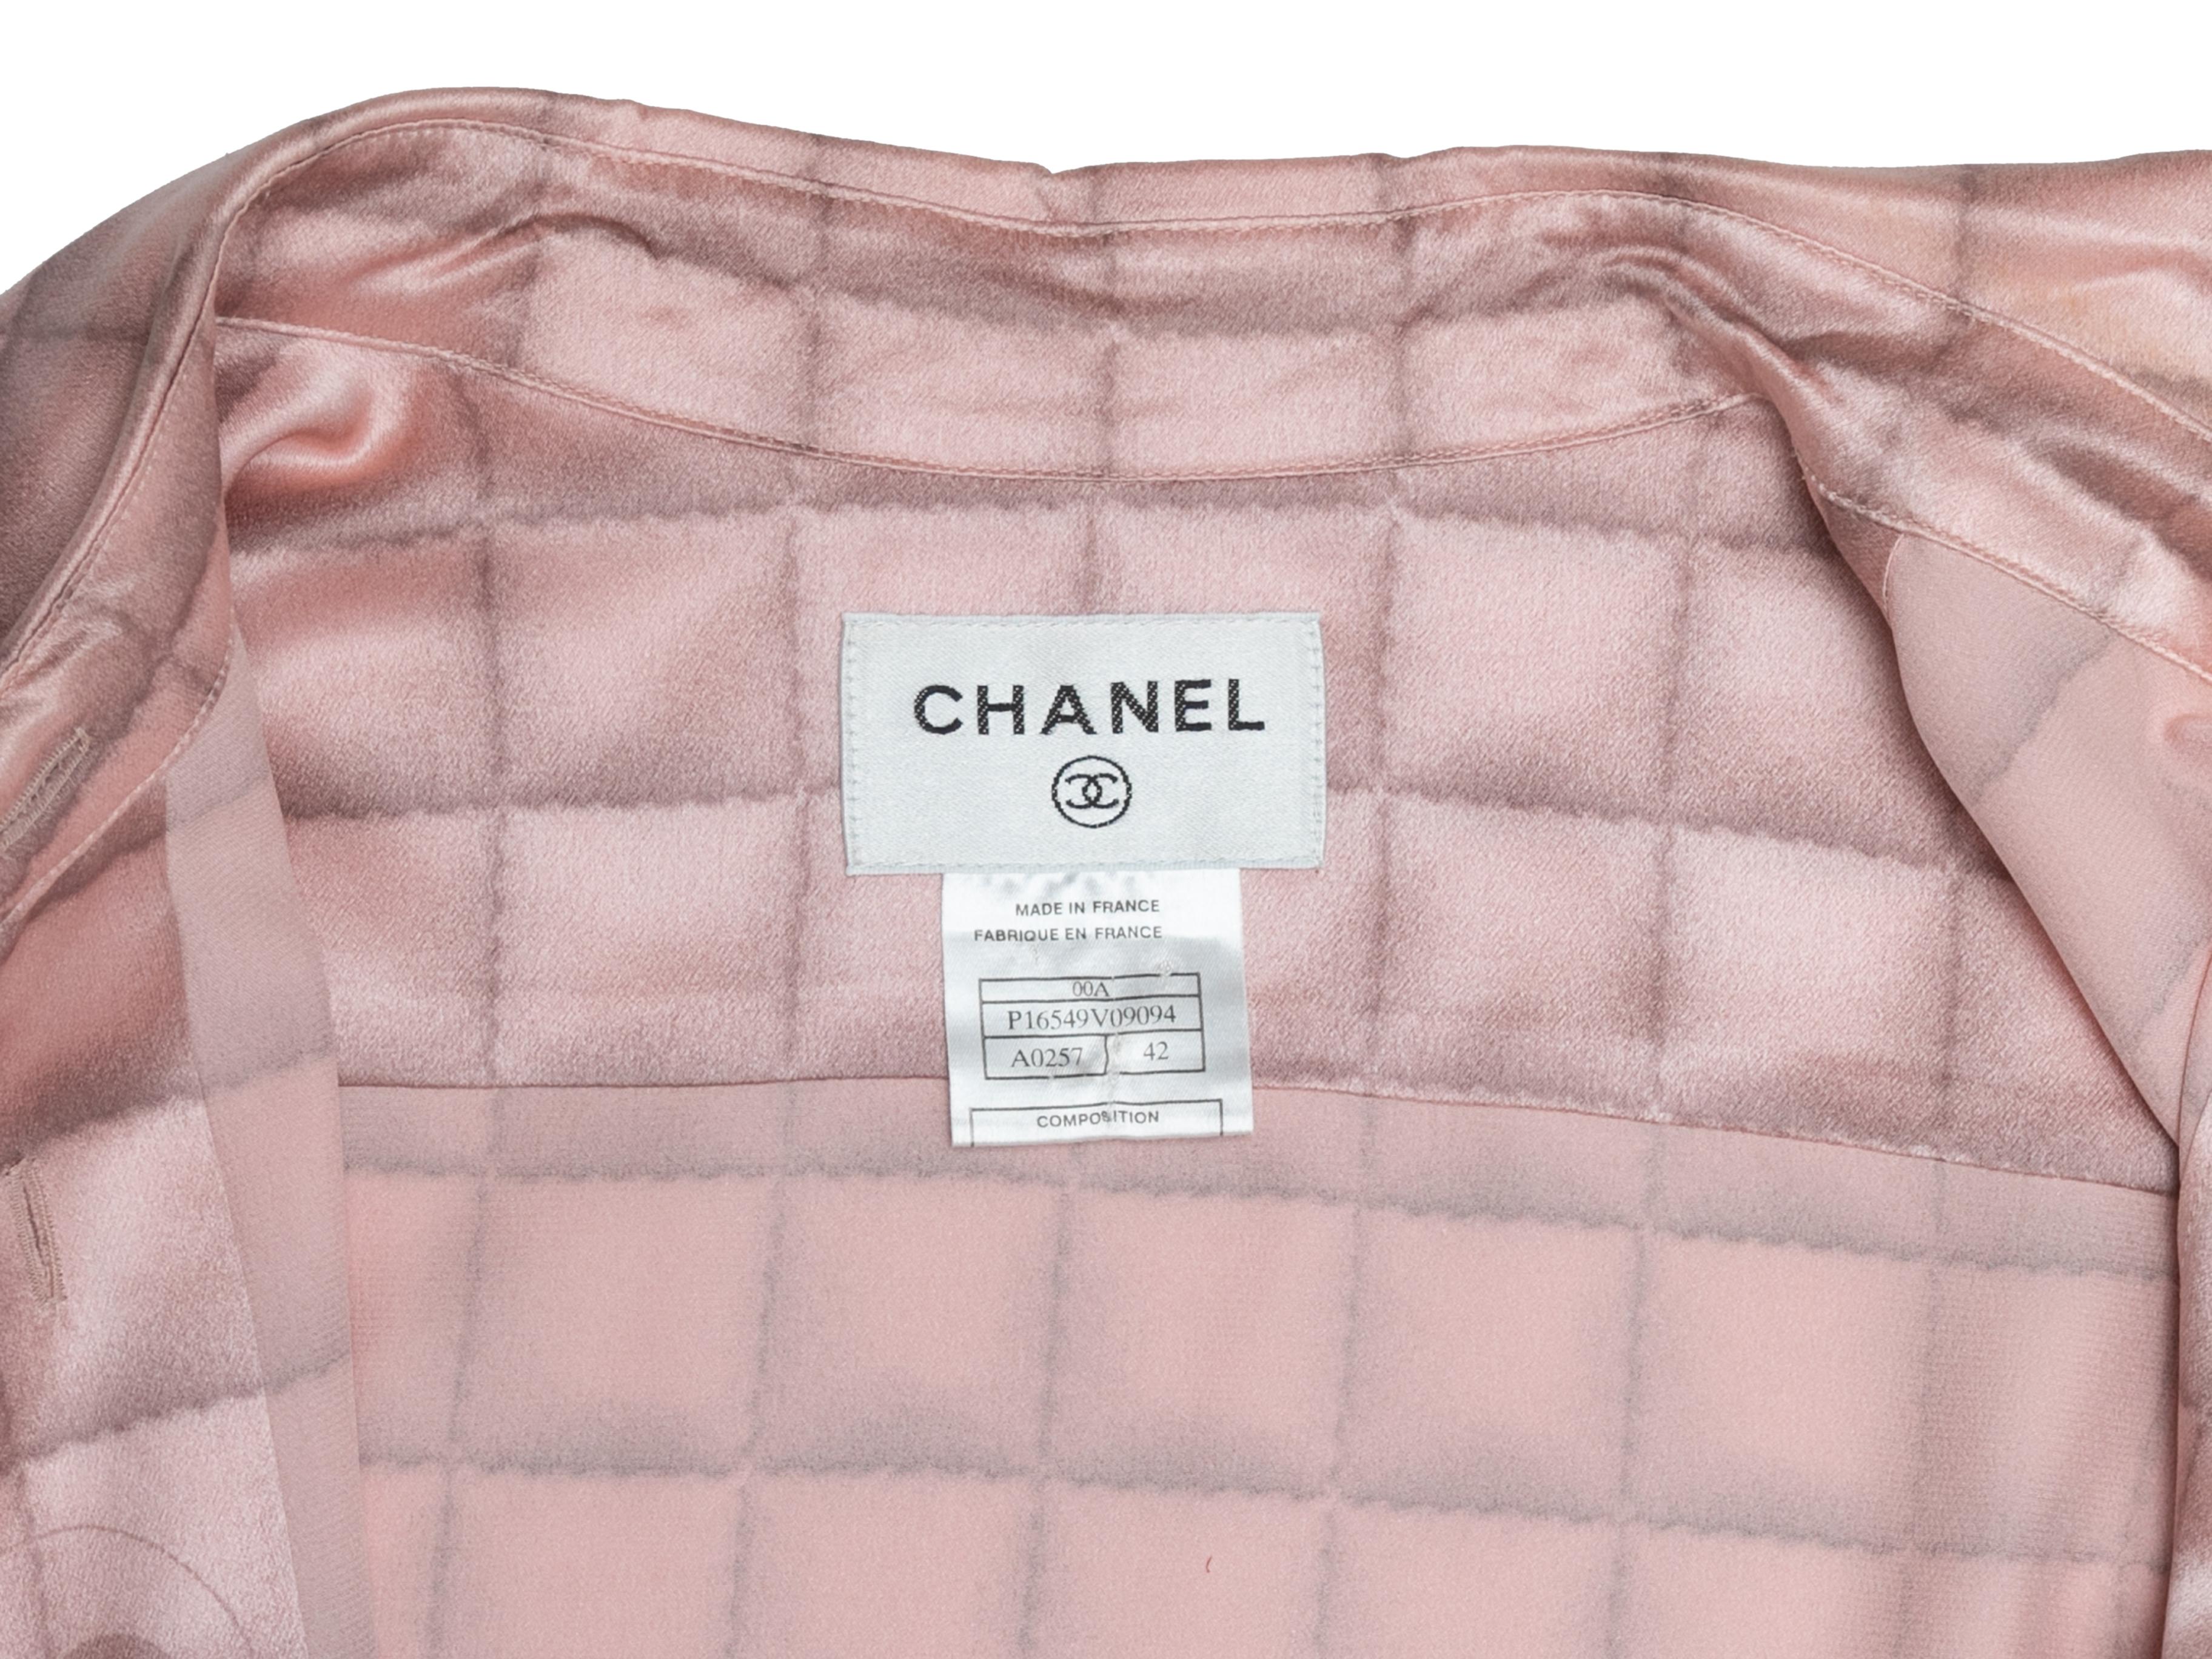 Vintage Light Pink Chanel Fall/Winter 2000 Printed Silk Dress Size FR 42 For Sale 1